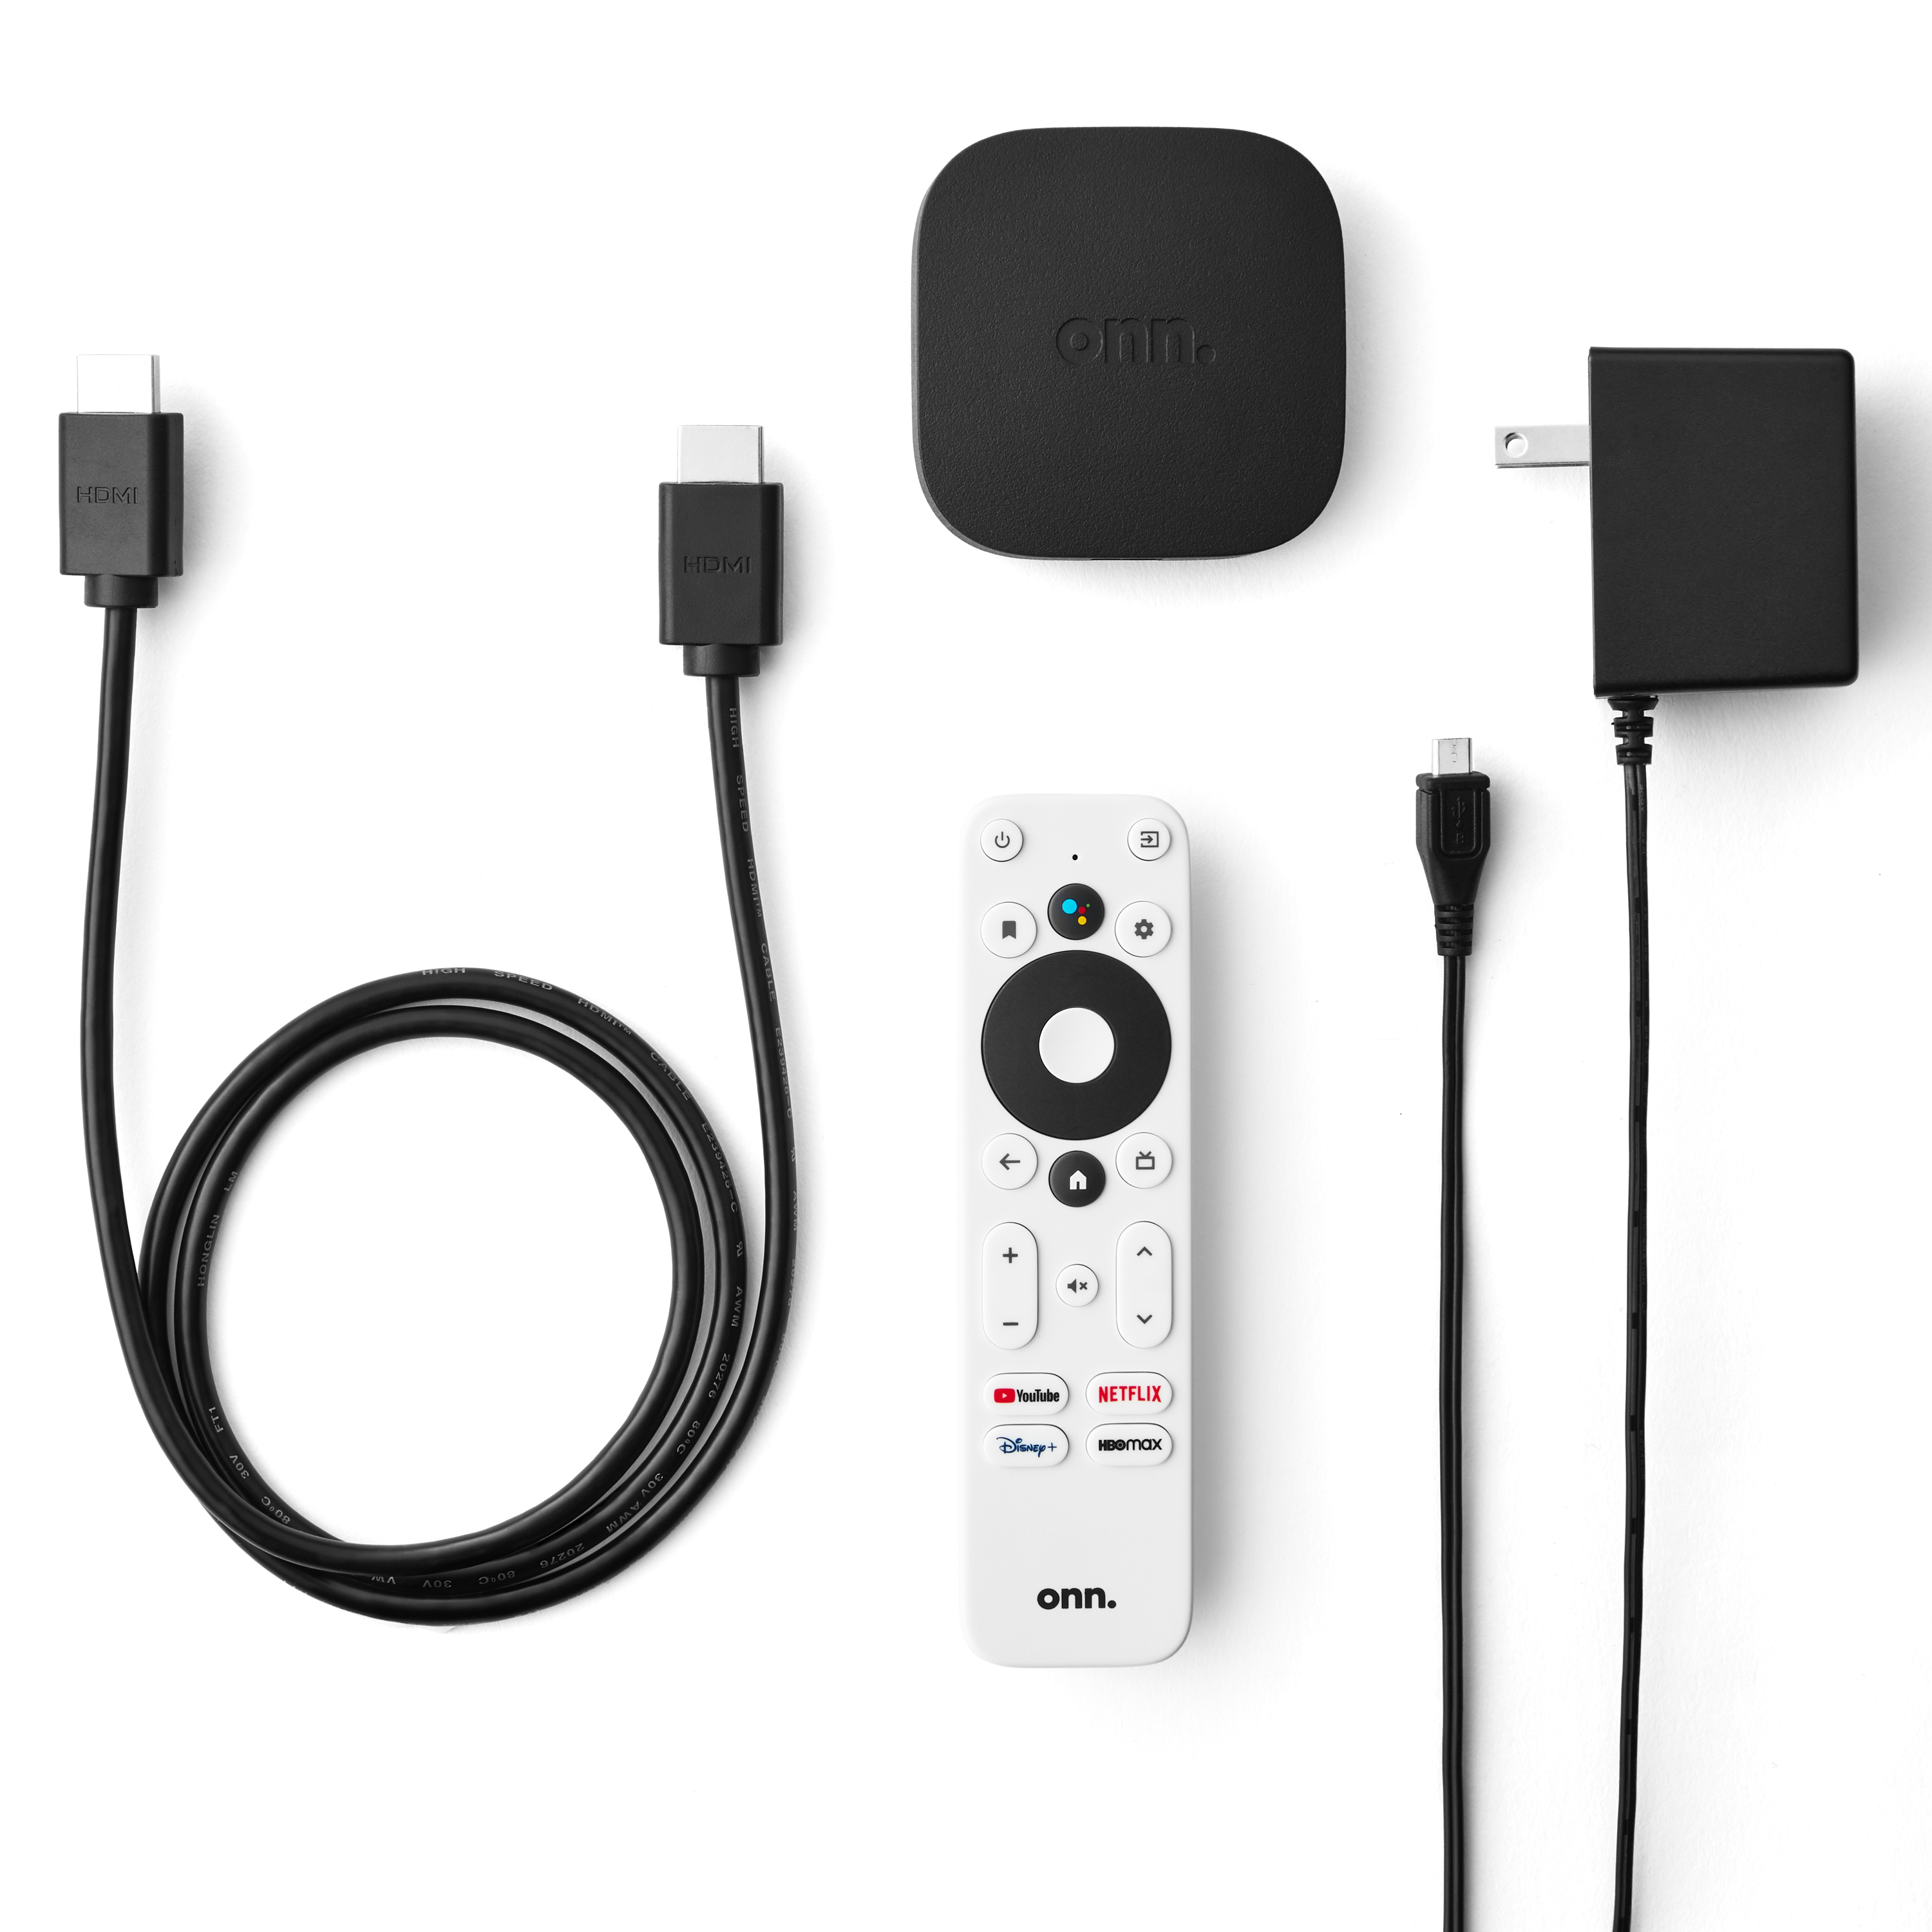 onn. Android TV 4K UHD Streaming Device with Voice Remote Control & HDMI Cable - image 3 of 11